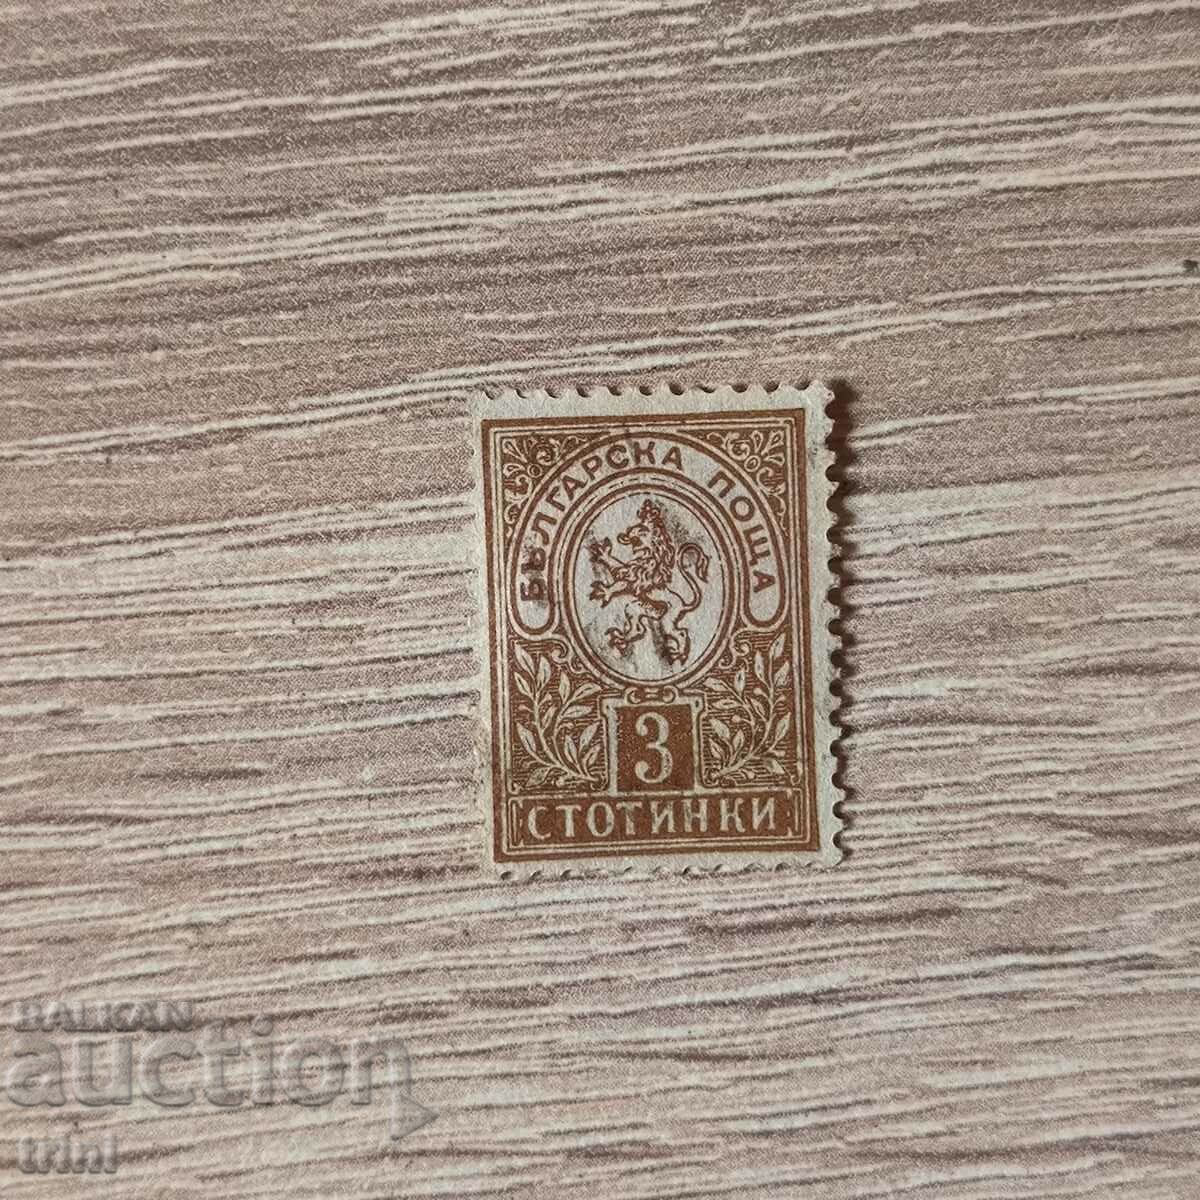 Bulgaria Small lion 1889 3 cents